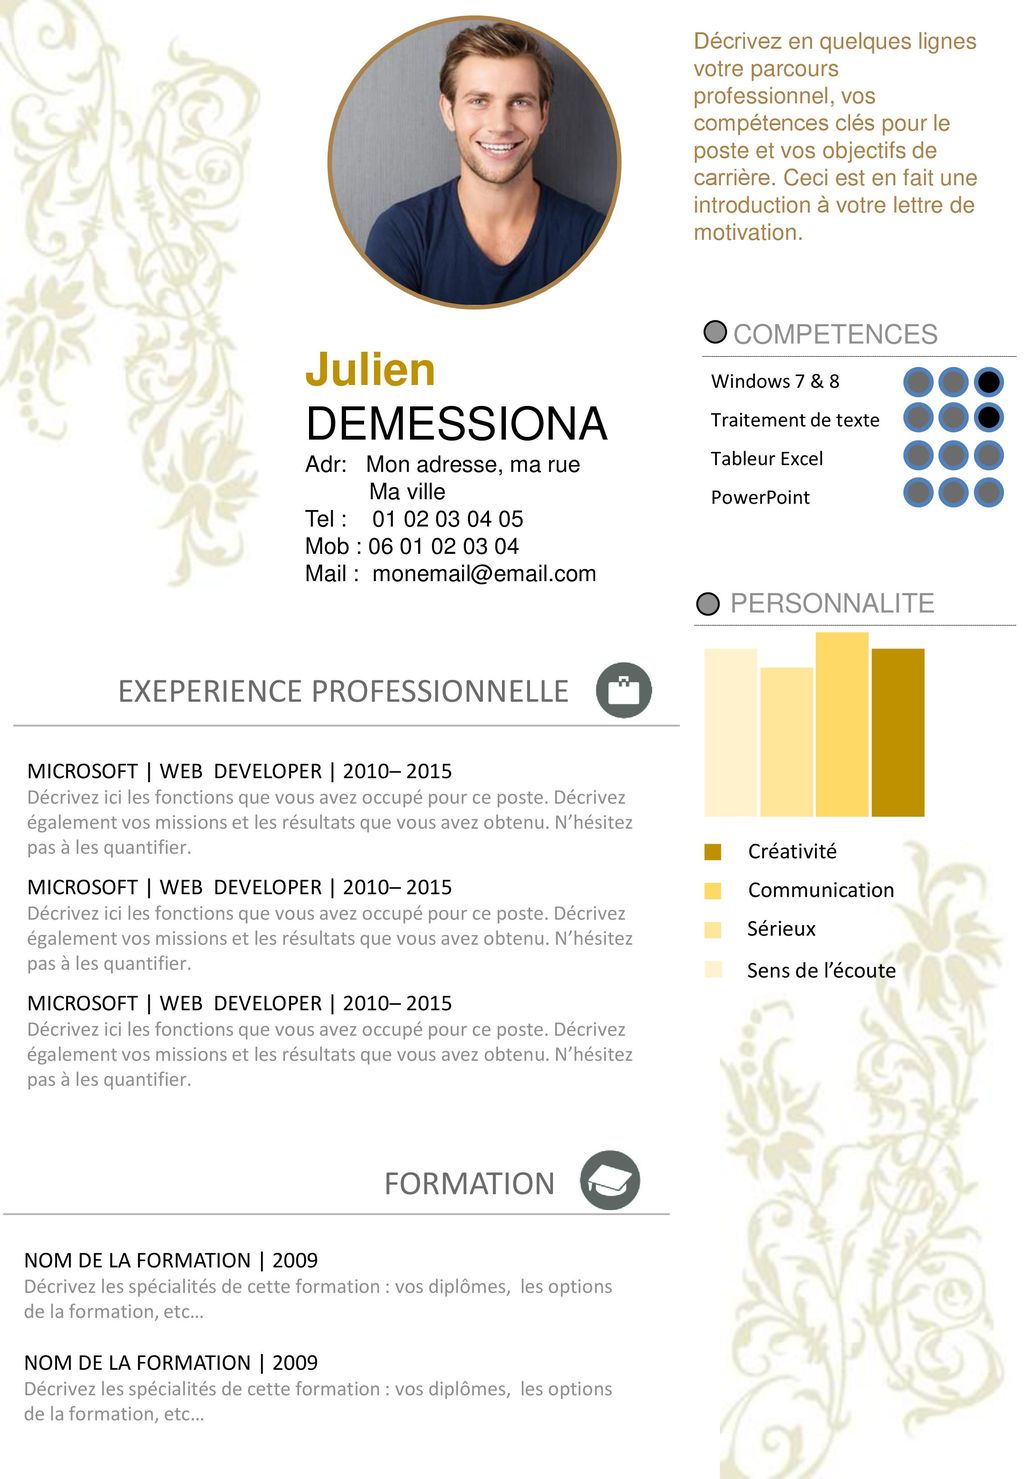 Julien DEMESSIONA EXEPERIENCE PROFESSIONNELLE FORMATION PERSONNALITE